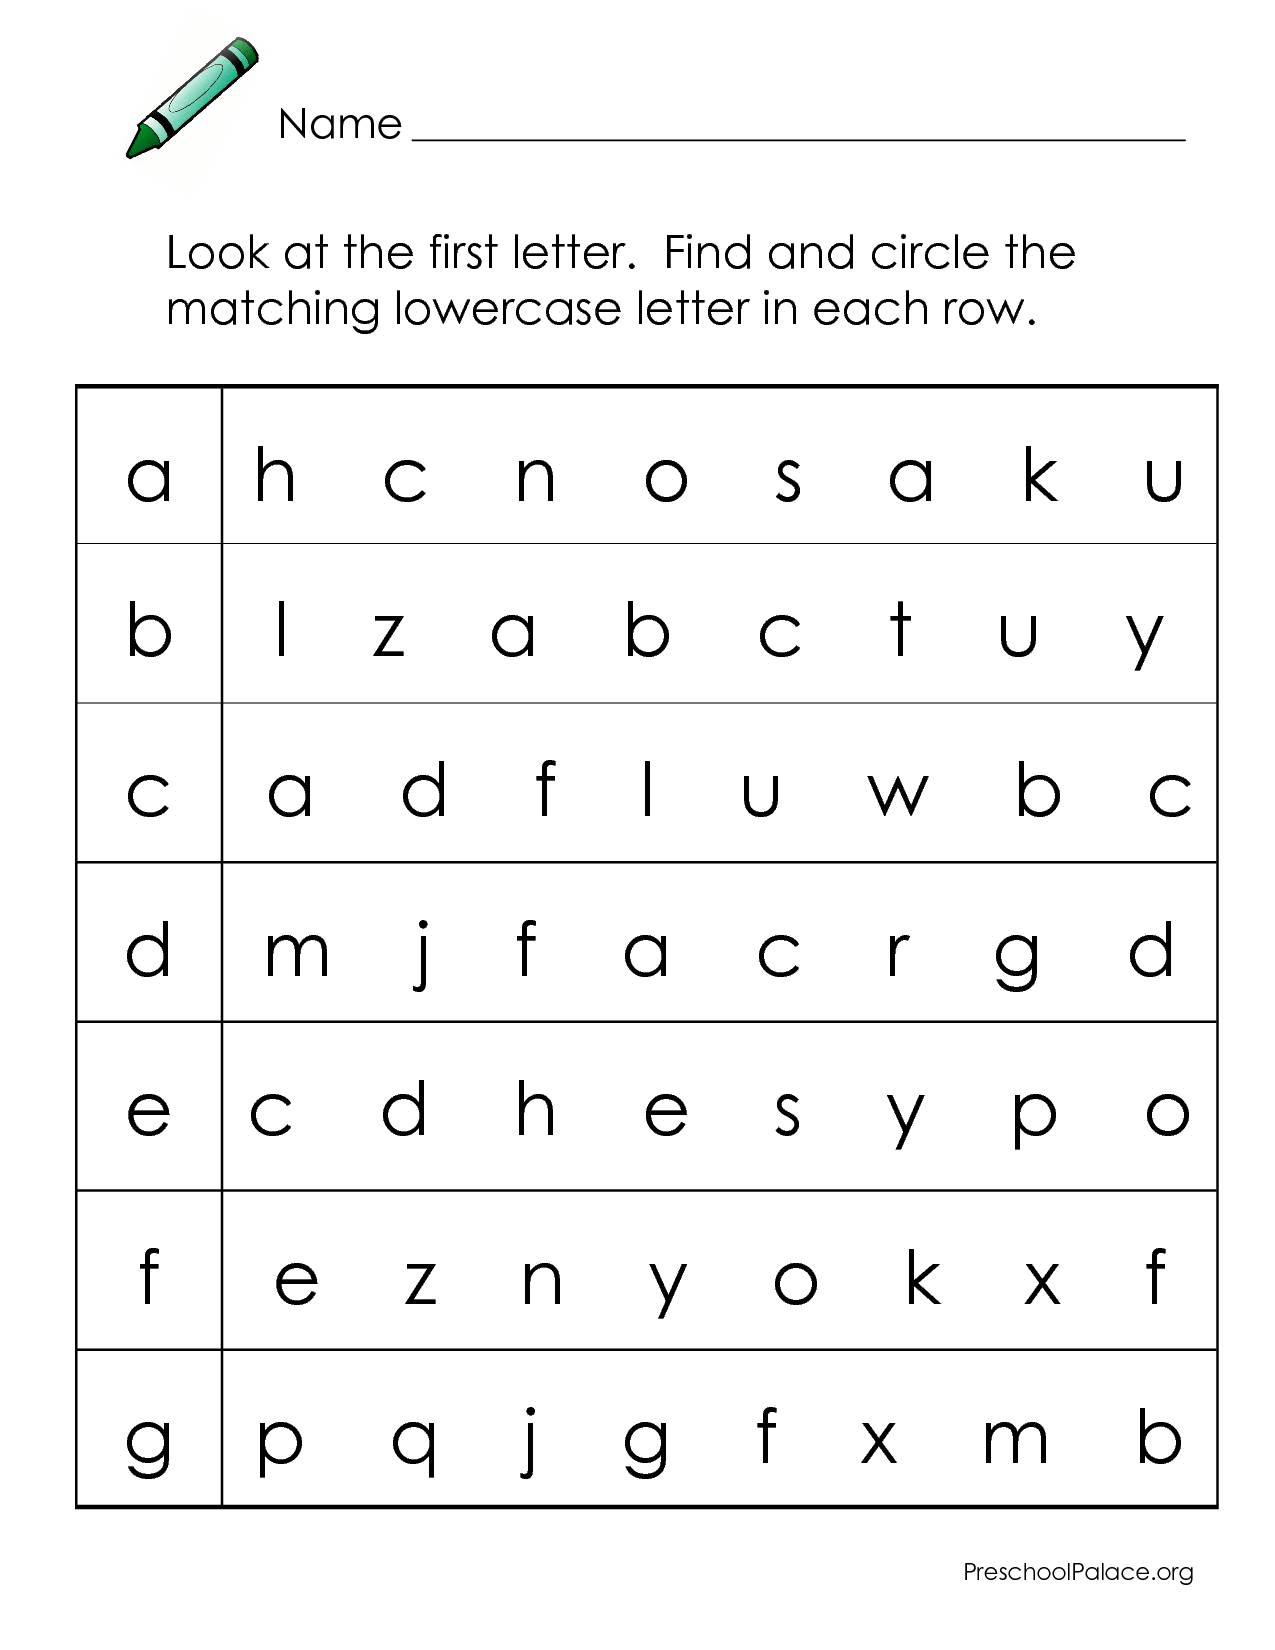 Abcs - Letter Matching A-G Lowercase | Letter Recognition within Alphabet Recognition Worksheets For Preschool